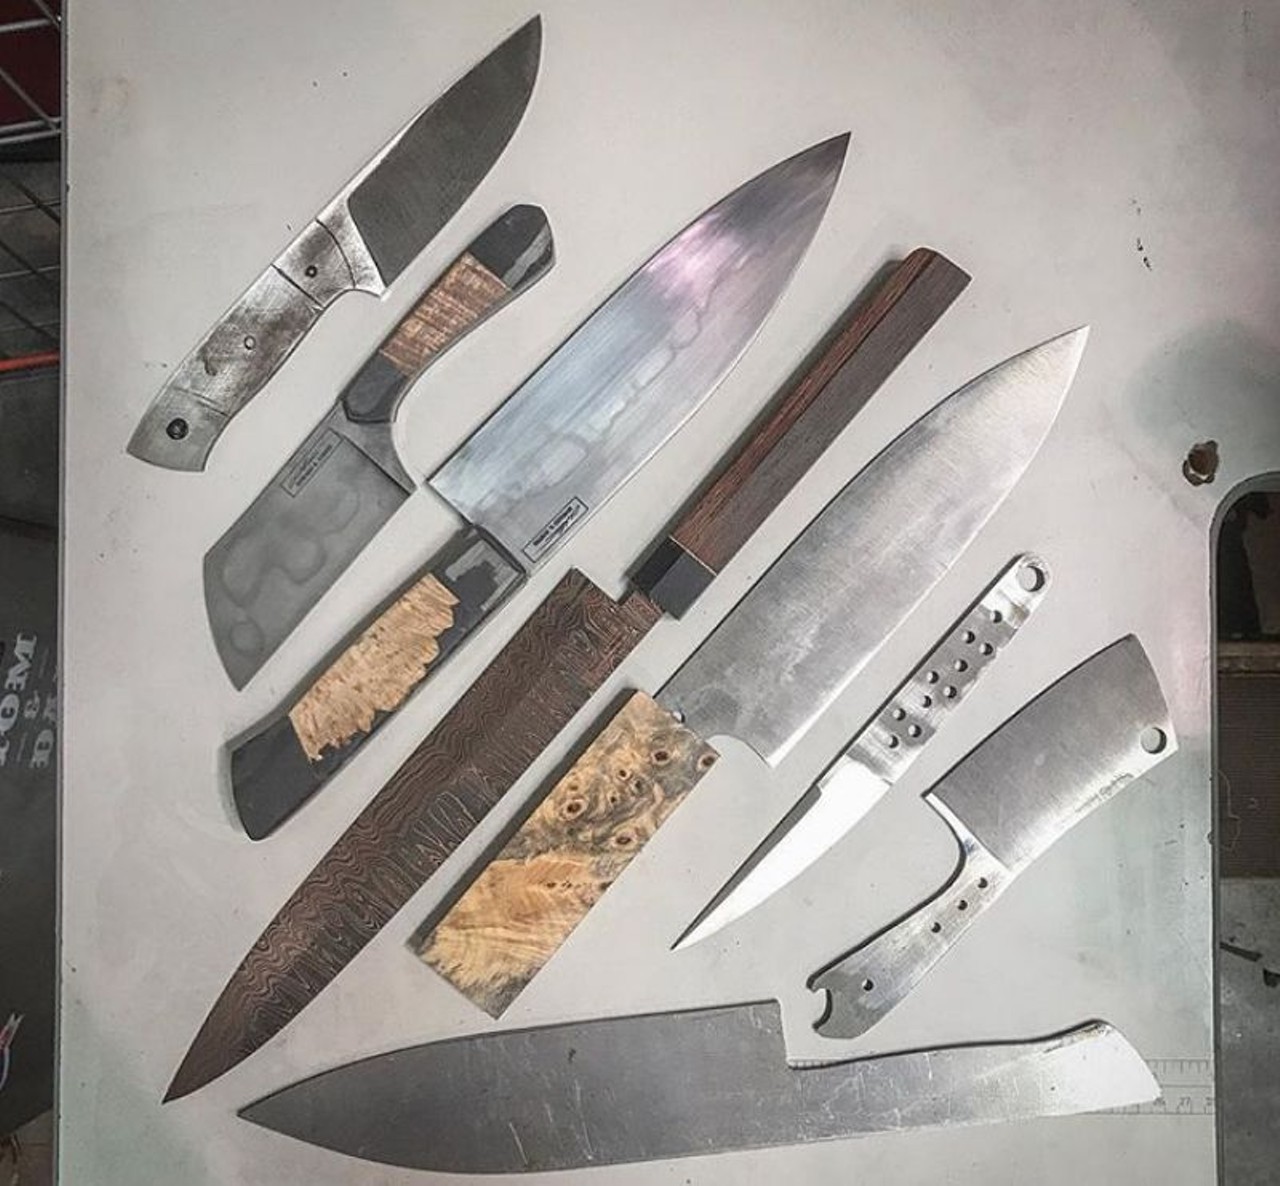 Edward R Knives  
These high-carbon steel knives are not just pieces of art, but utilitarian as well. Perfect for anyone looking for quality in the kitchen or in any situation you need to cut things.
Photo via ed_jits / Instagram